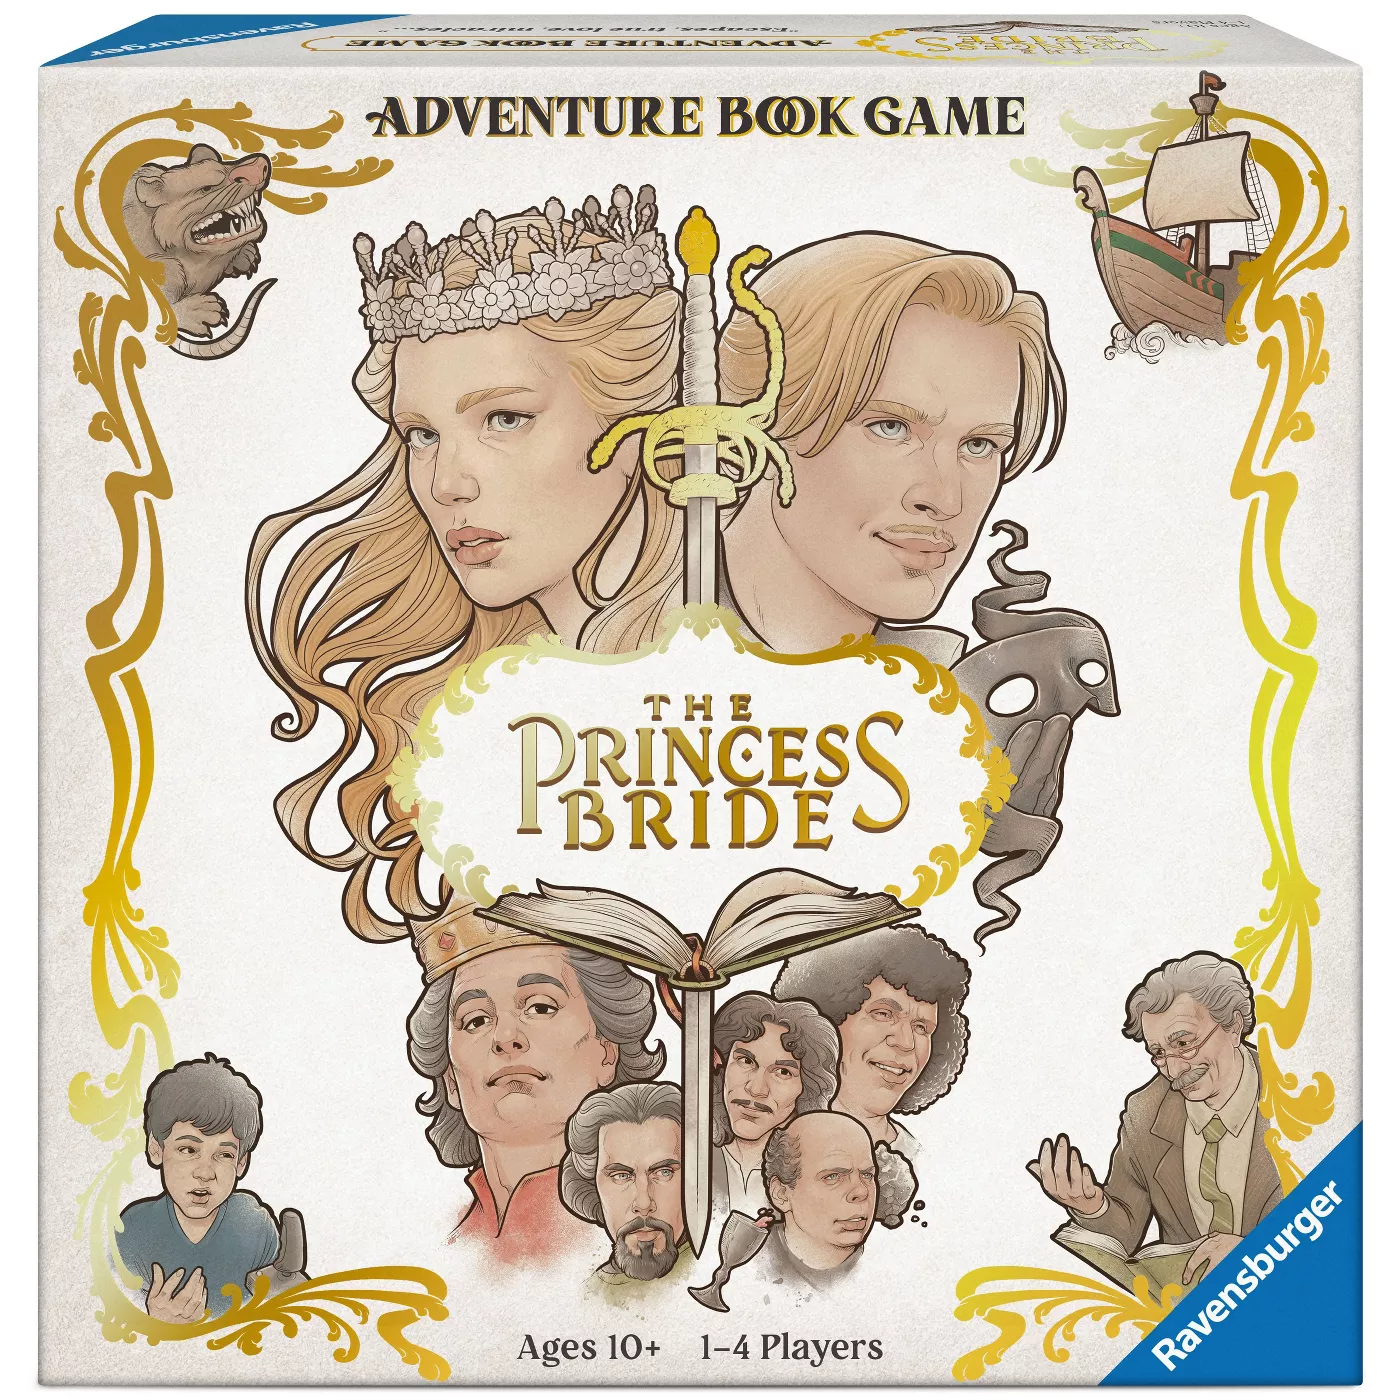 The Princess Bride Adventure Book Game box showing cover art